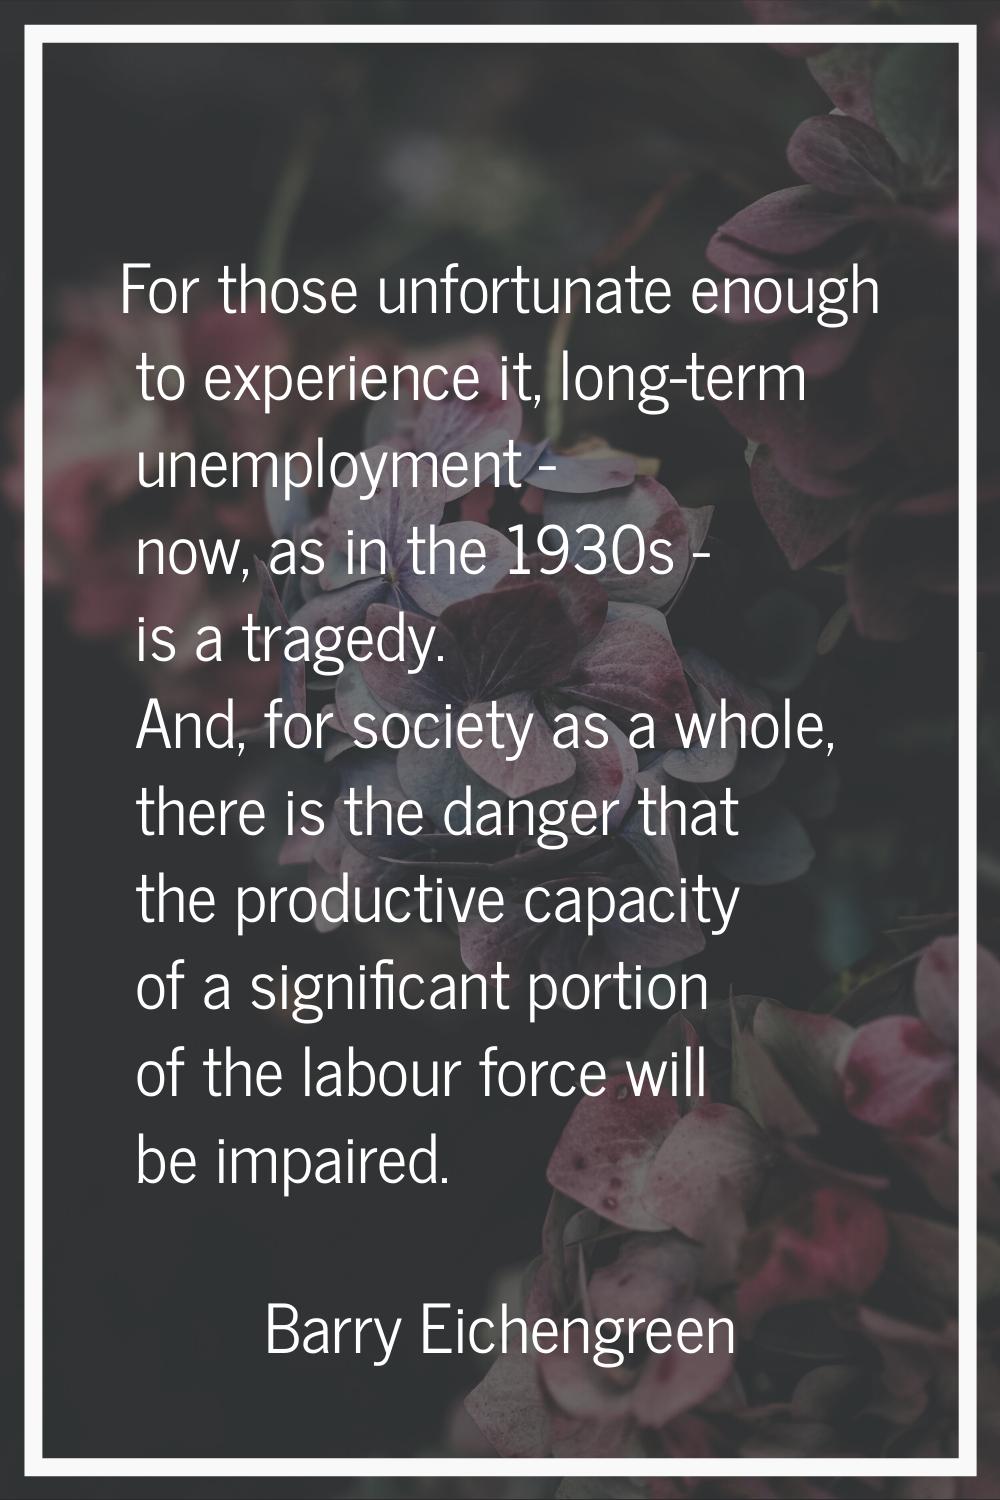 For those unfortunate enough to experience it, long-term unemployment - now, as in the 1930s - is a